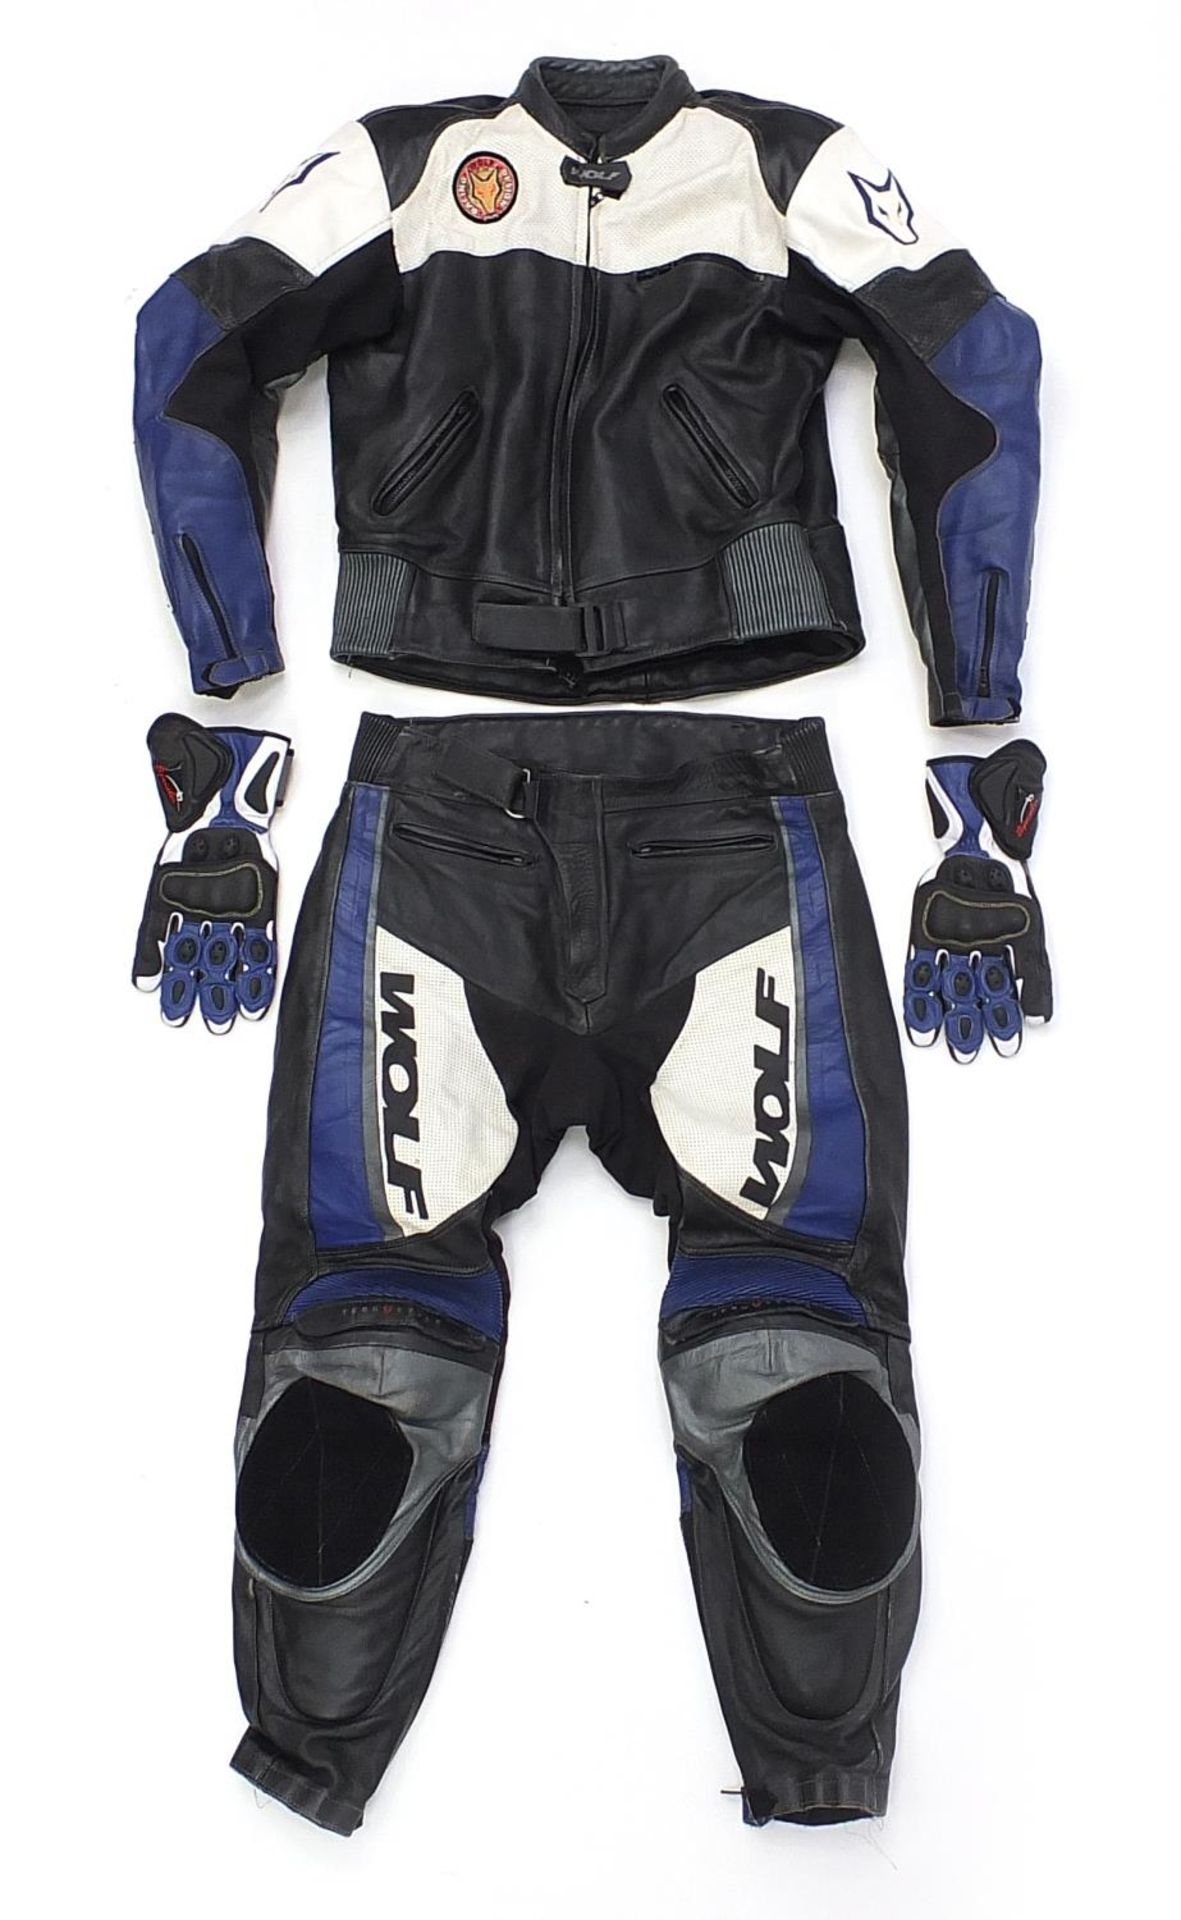 Wolf, Spirit of the Wild two piece motorcycle leathers and a pair of Spada gloves, the jacket size